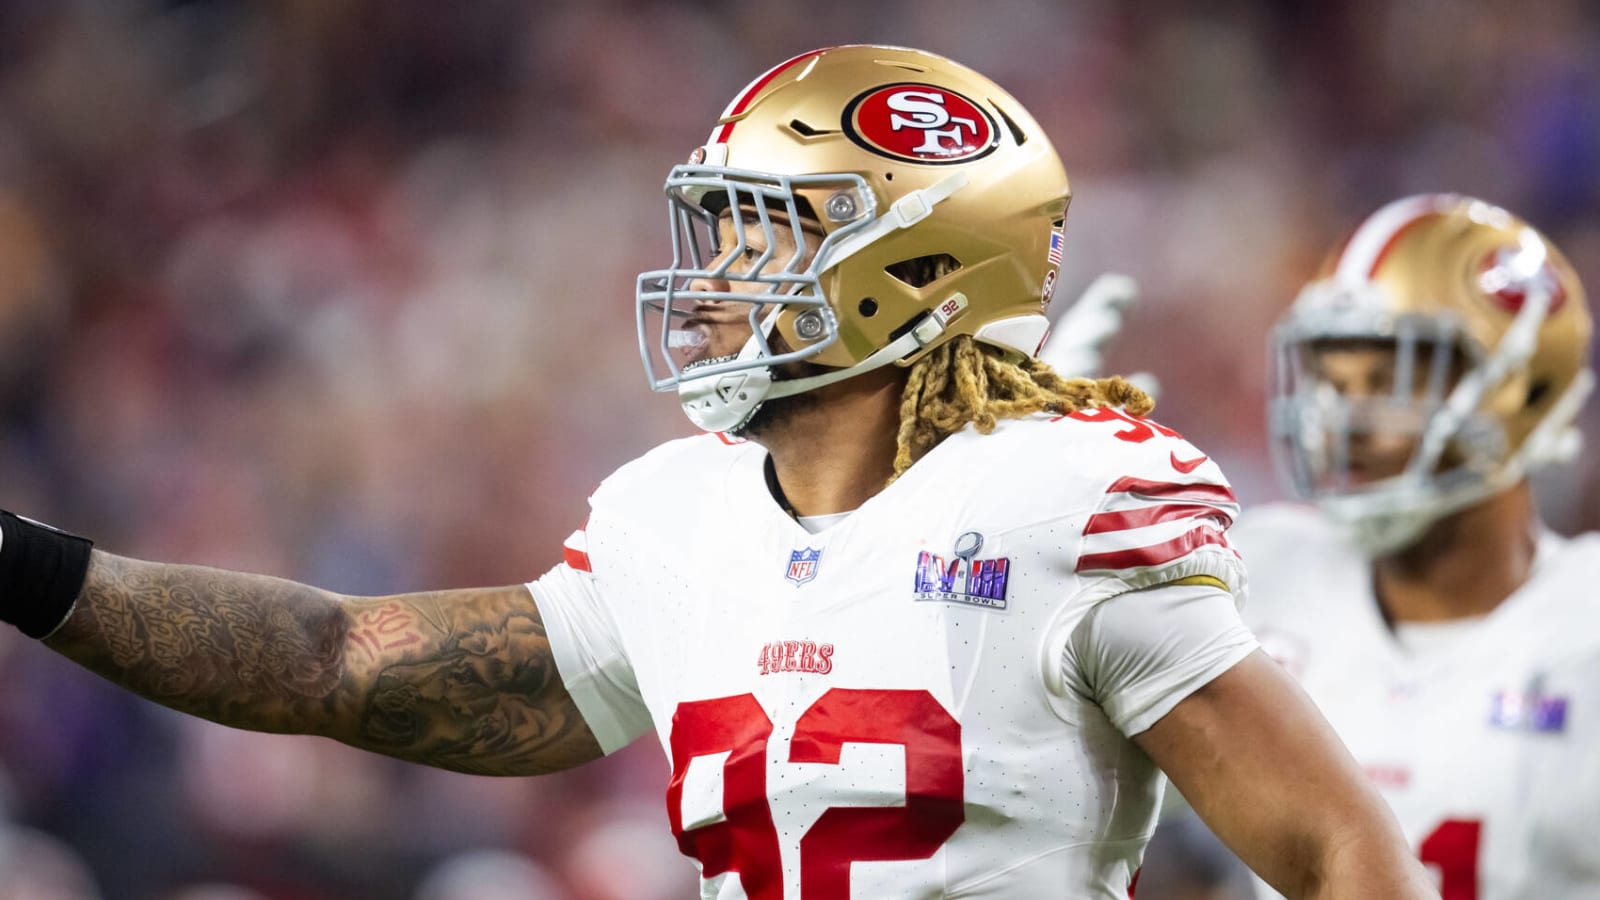 Report: 49ers Might Move On From Key Player After Super Bowl Performance